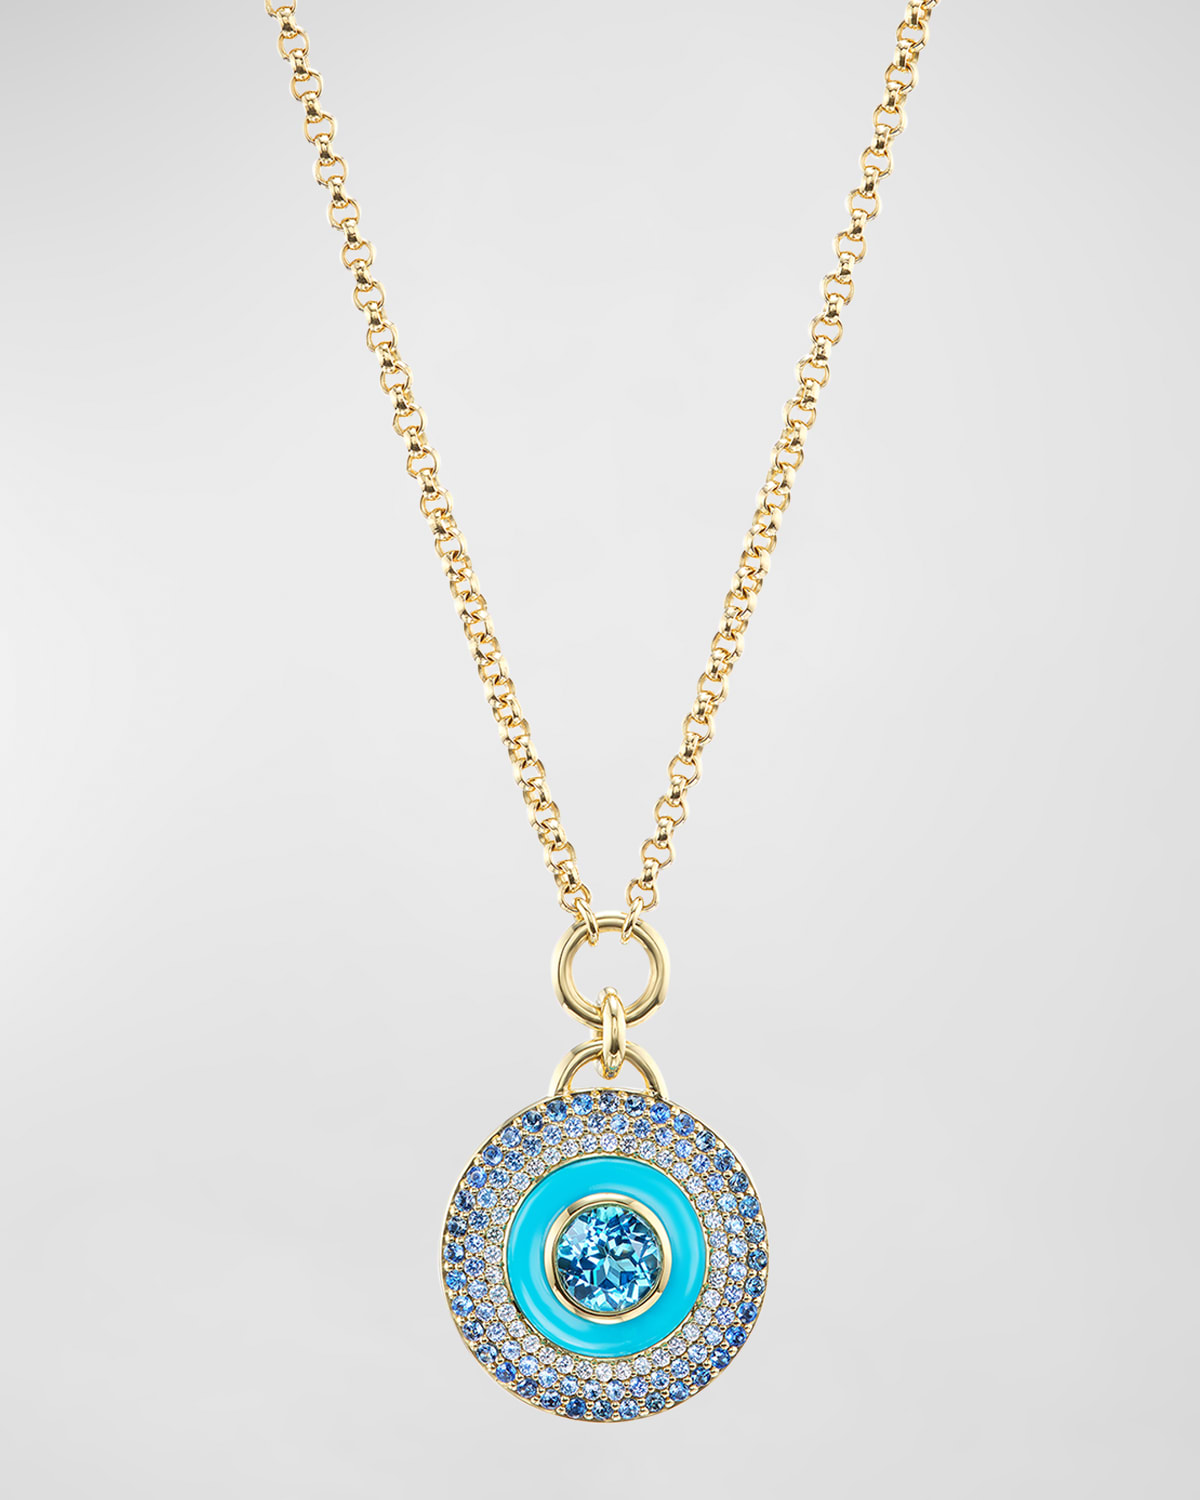 Water Medallion 18K White and Yellow Gold Necklace with Topaz, Sapphire and Turquoise